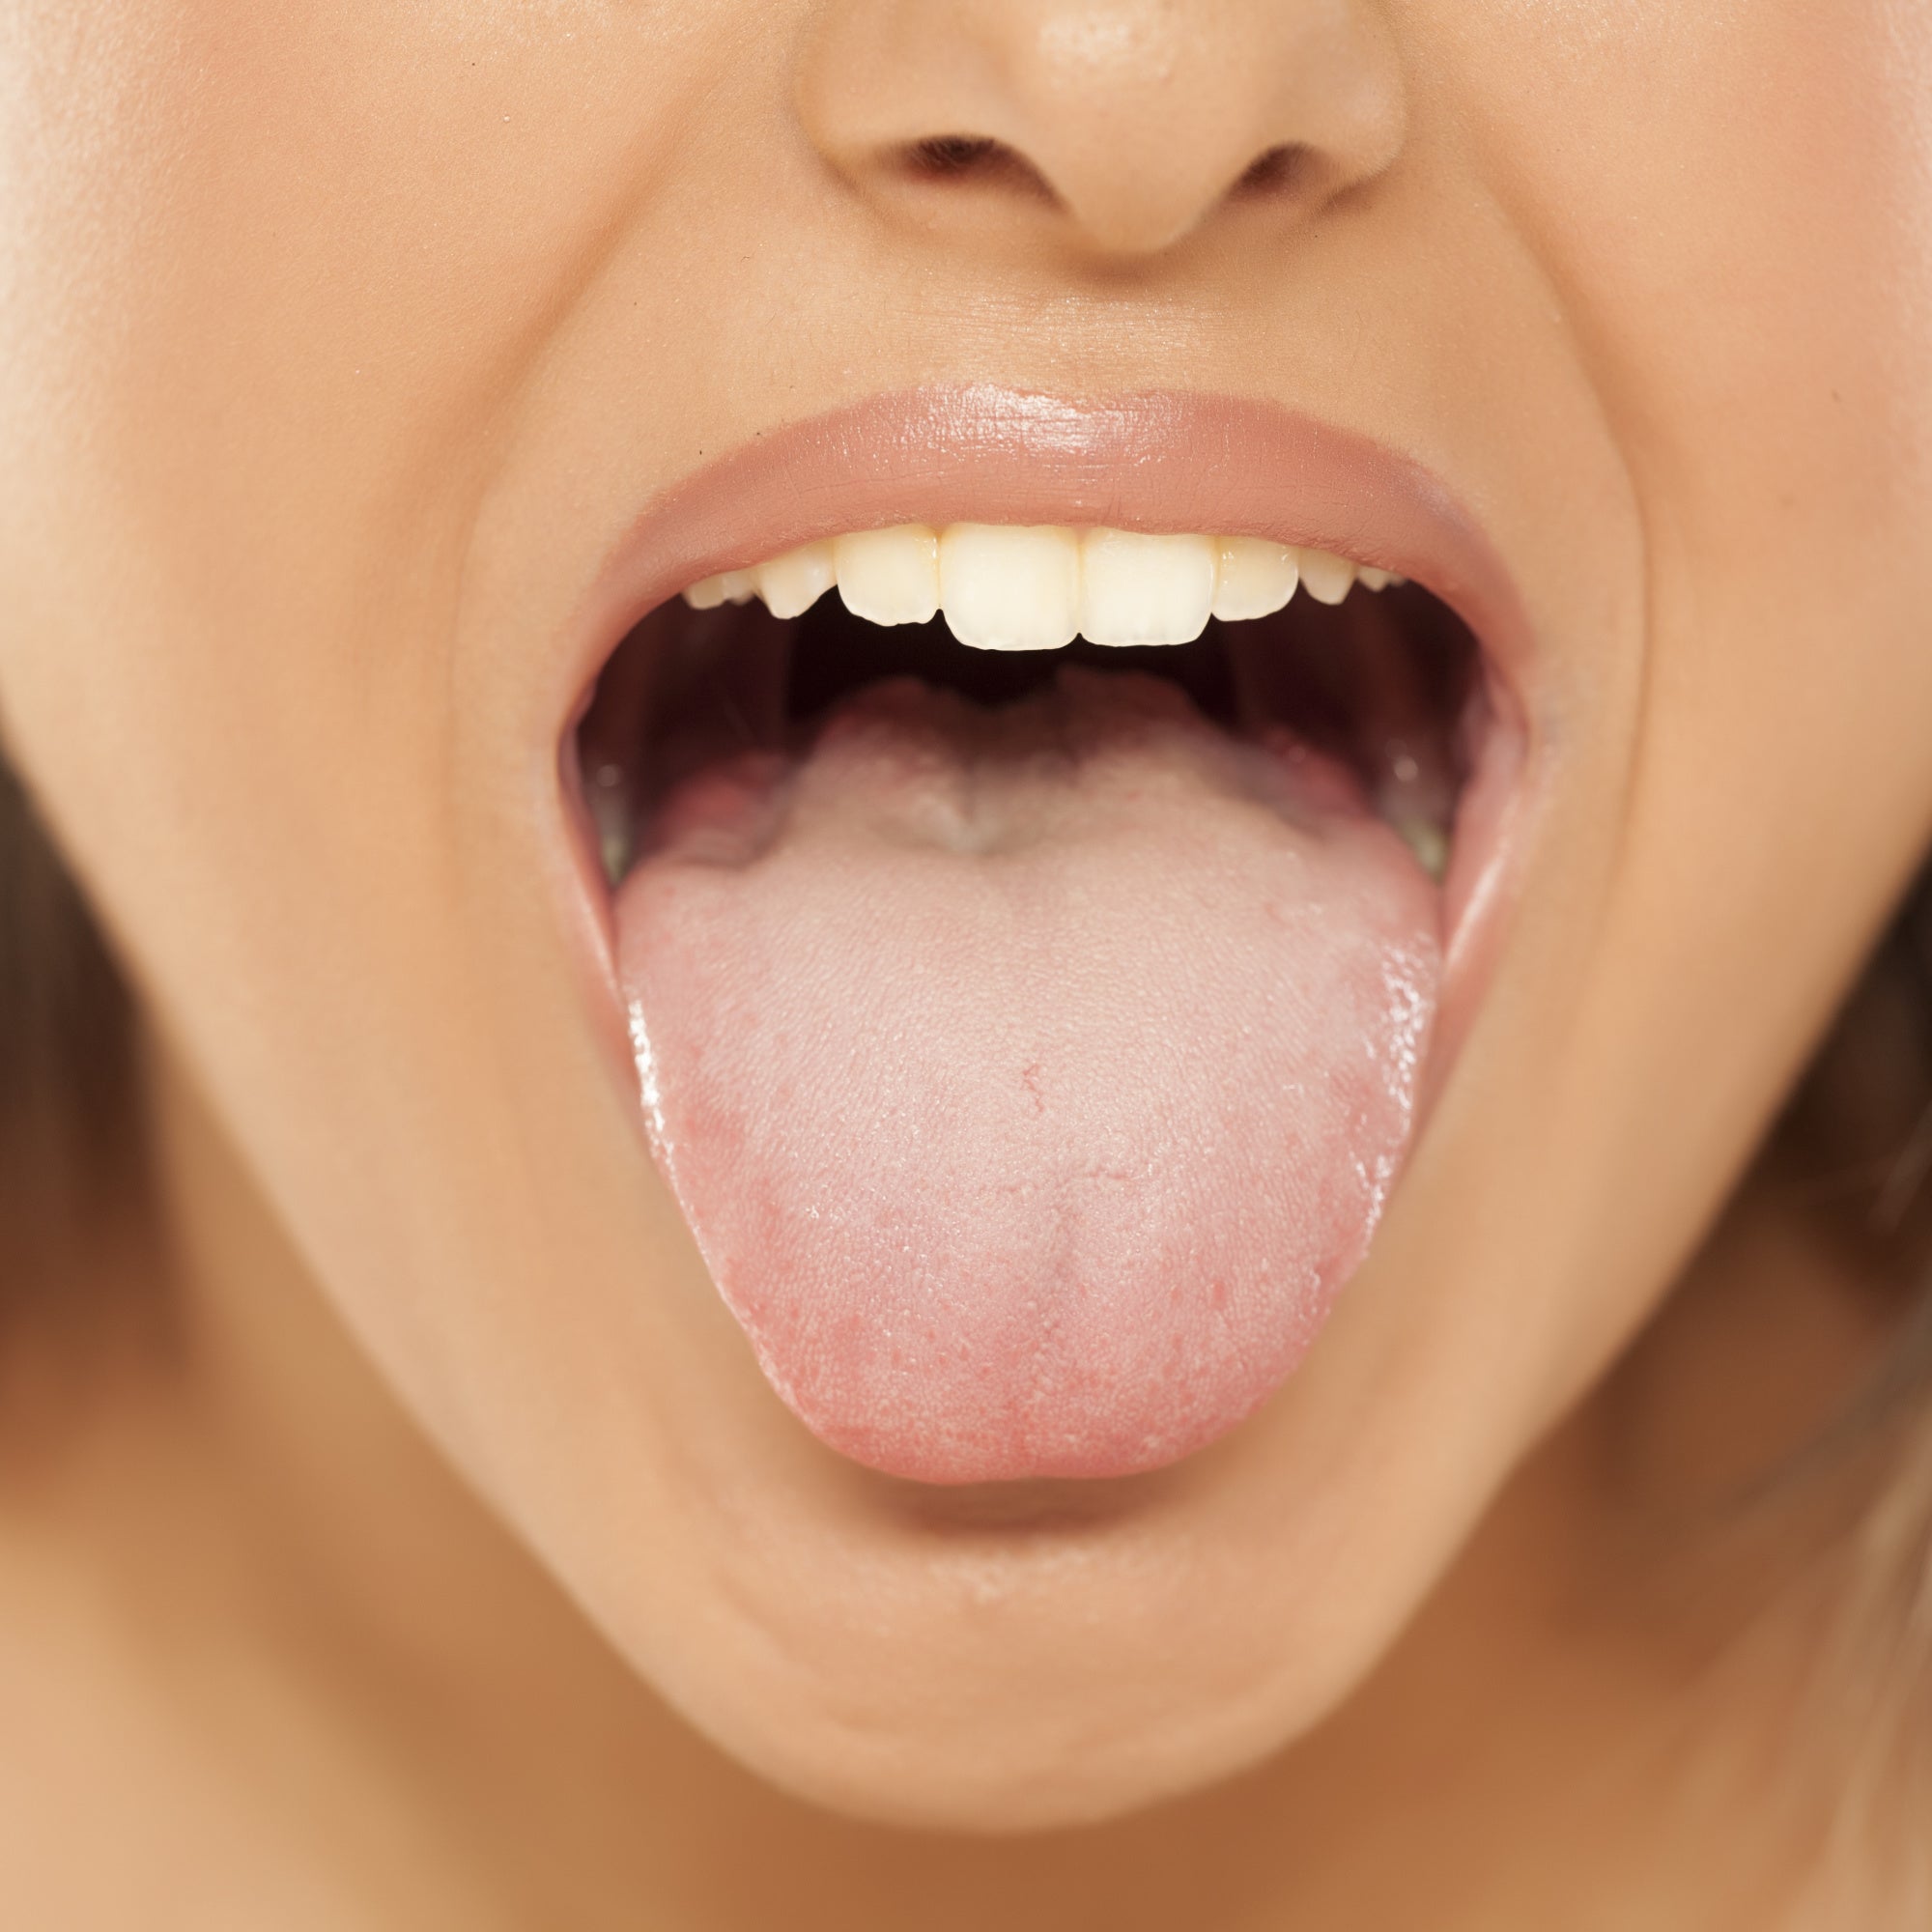 tongue cleaning to remove bacteria and dead skin cells to freshen breath